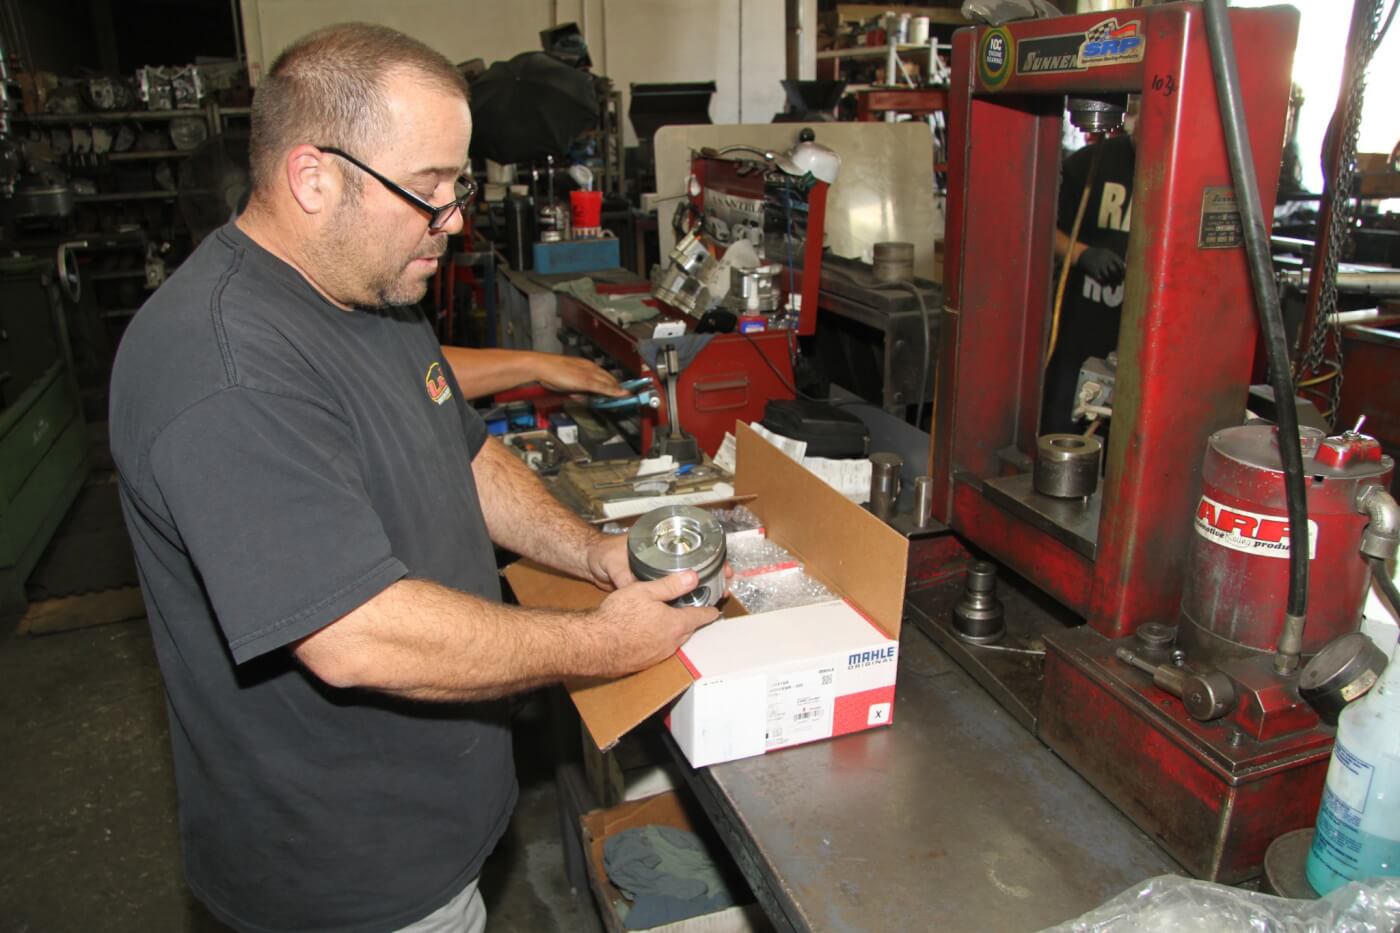 11. Derek Ranney, manager and co-owner of L&R Automotive, inspects the new MAHLE pistons before they’re installed in our 7.3L diesel. L&R has been in business for 38 years and supplies engine parts as well as top quality machine work for all types of engines. 